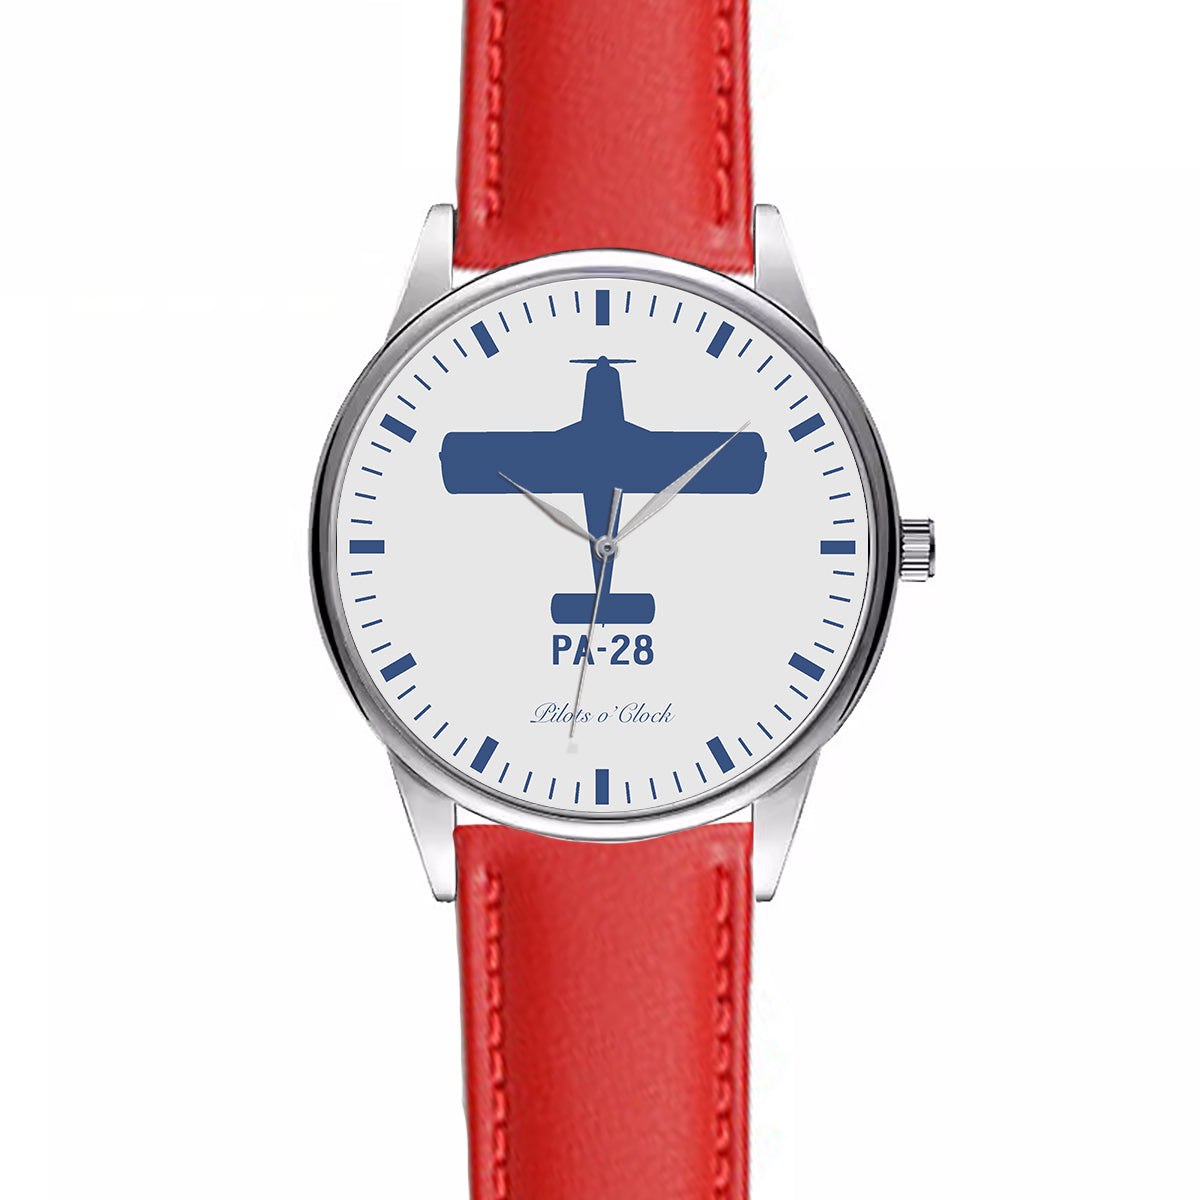 PA-28 Designed Fashion Leather Strap Watches